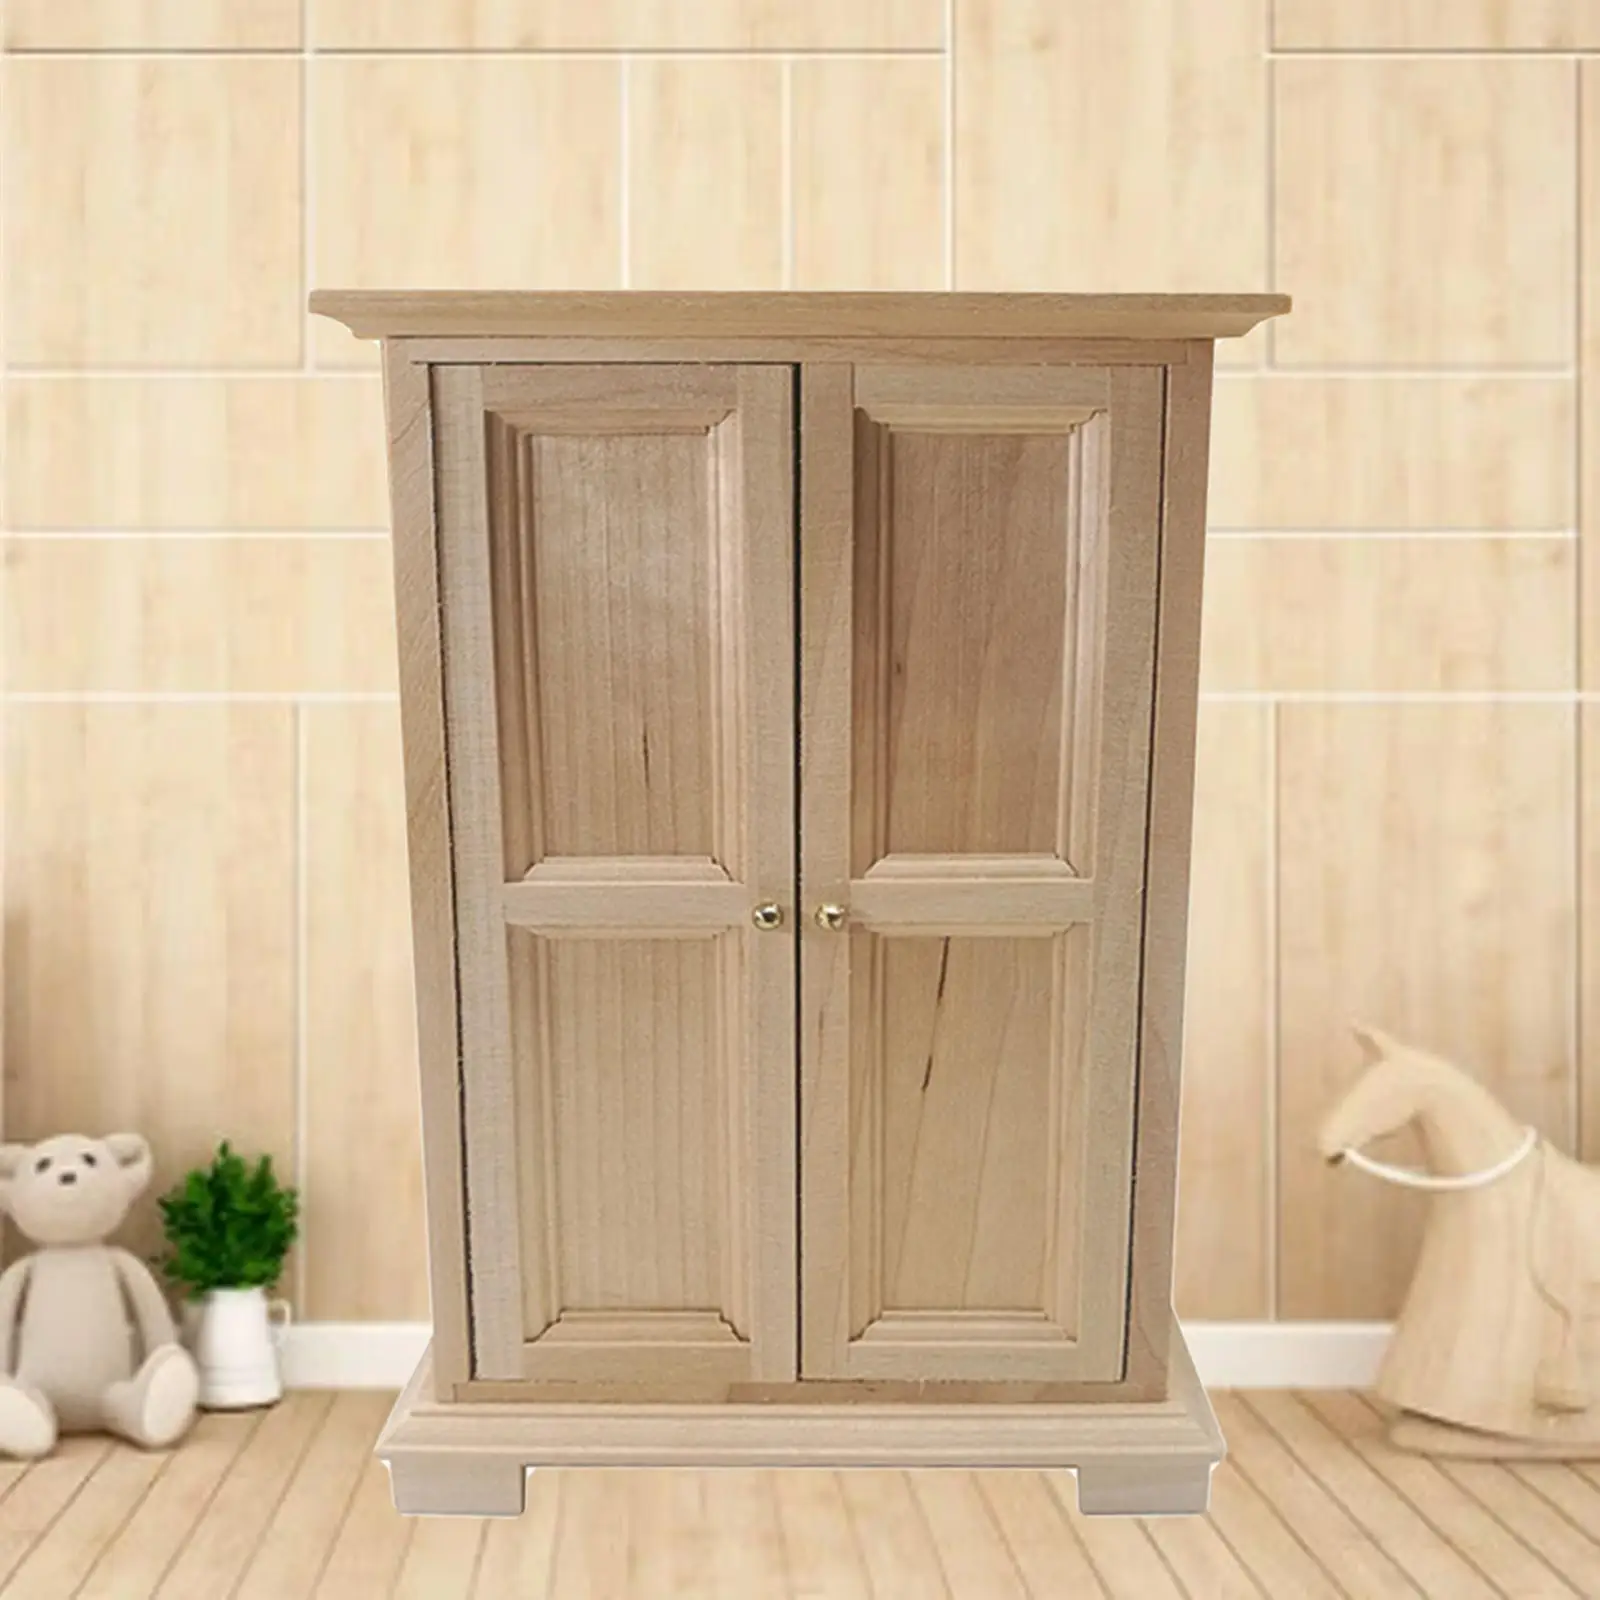 1/12 Scale Dollhouse Wooden Wardrobe Accessory Toy for Bedroom Doll House